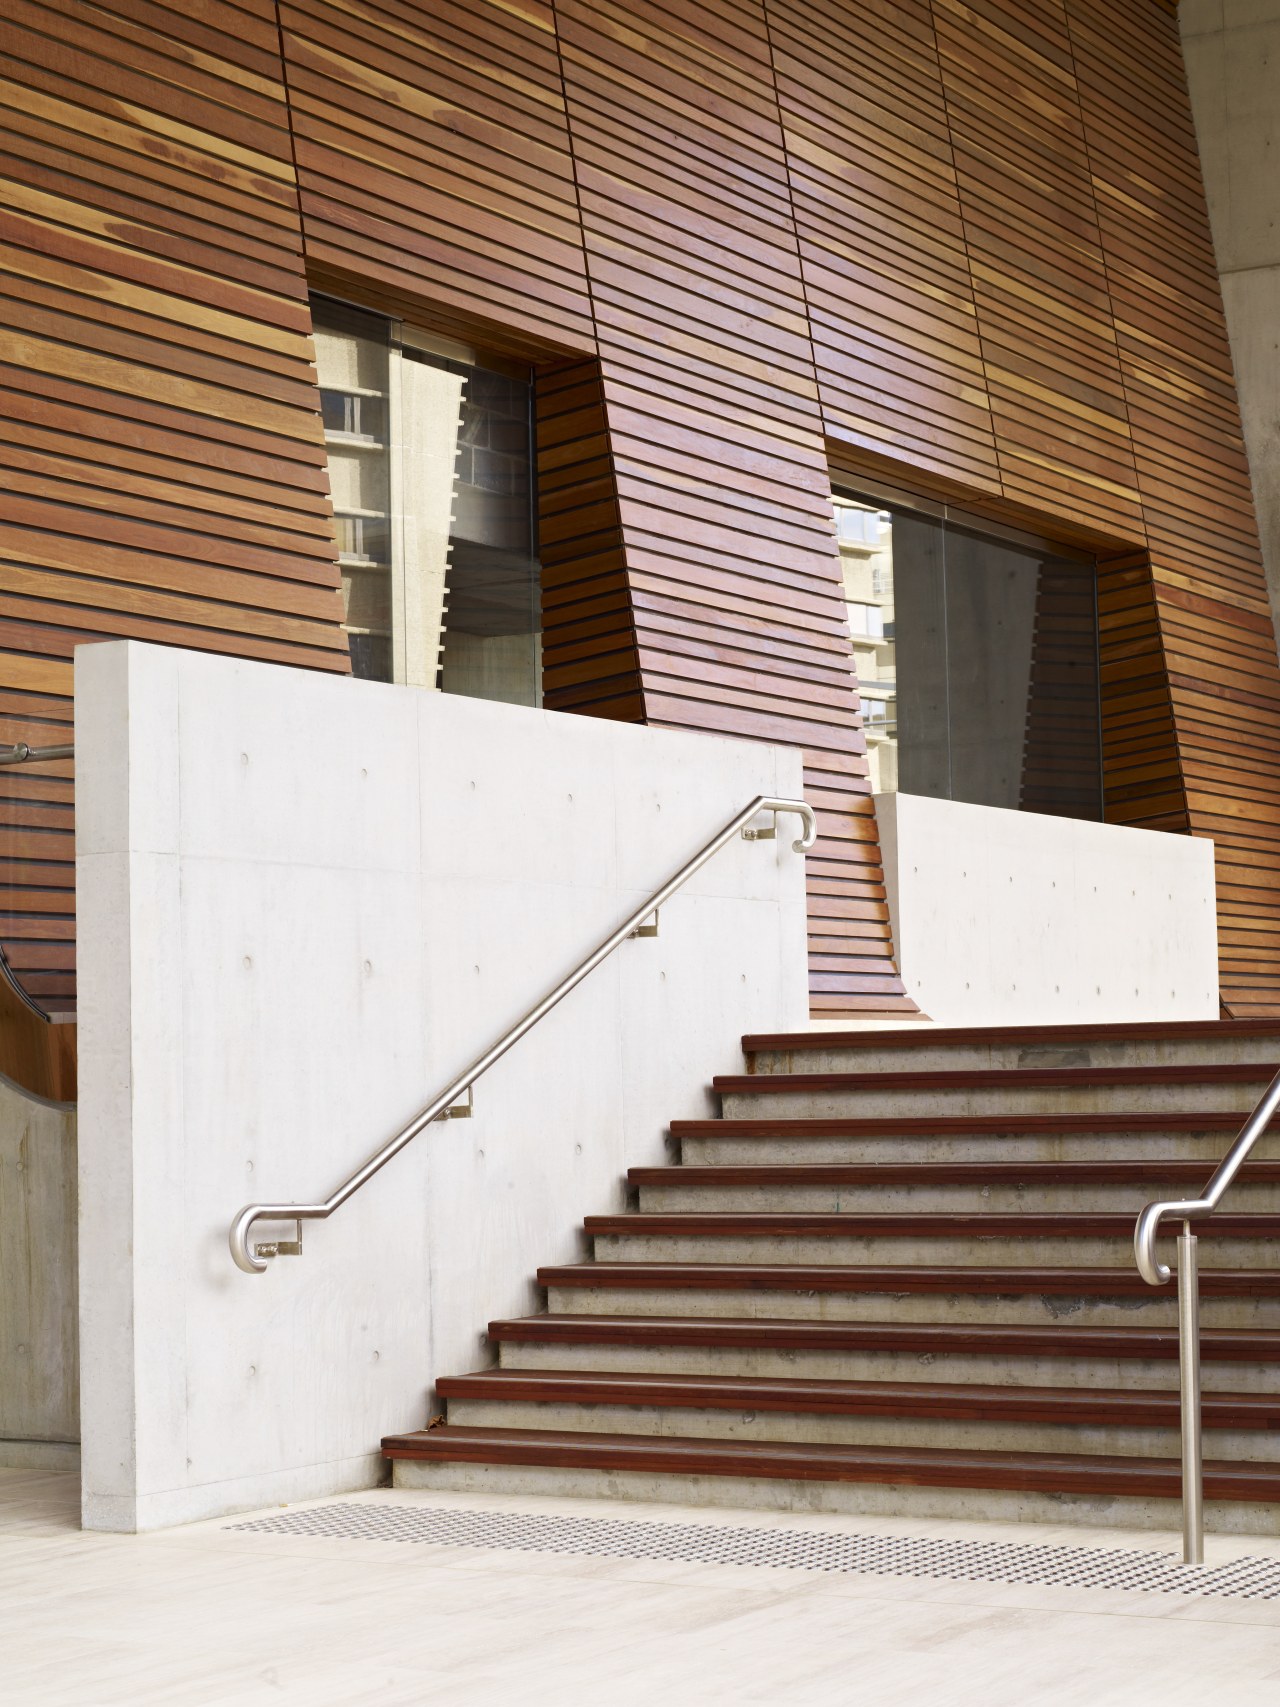 View of the entrance stairway with cladding by architecture, brick, brickwork, building, daylighting, door, facade, handrail, house, line, siding, stairs, wall, window, wood, wood stain, white, brown